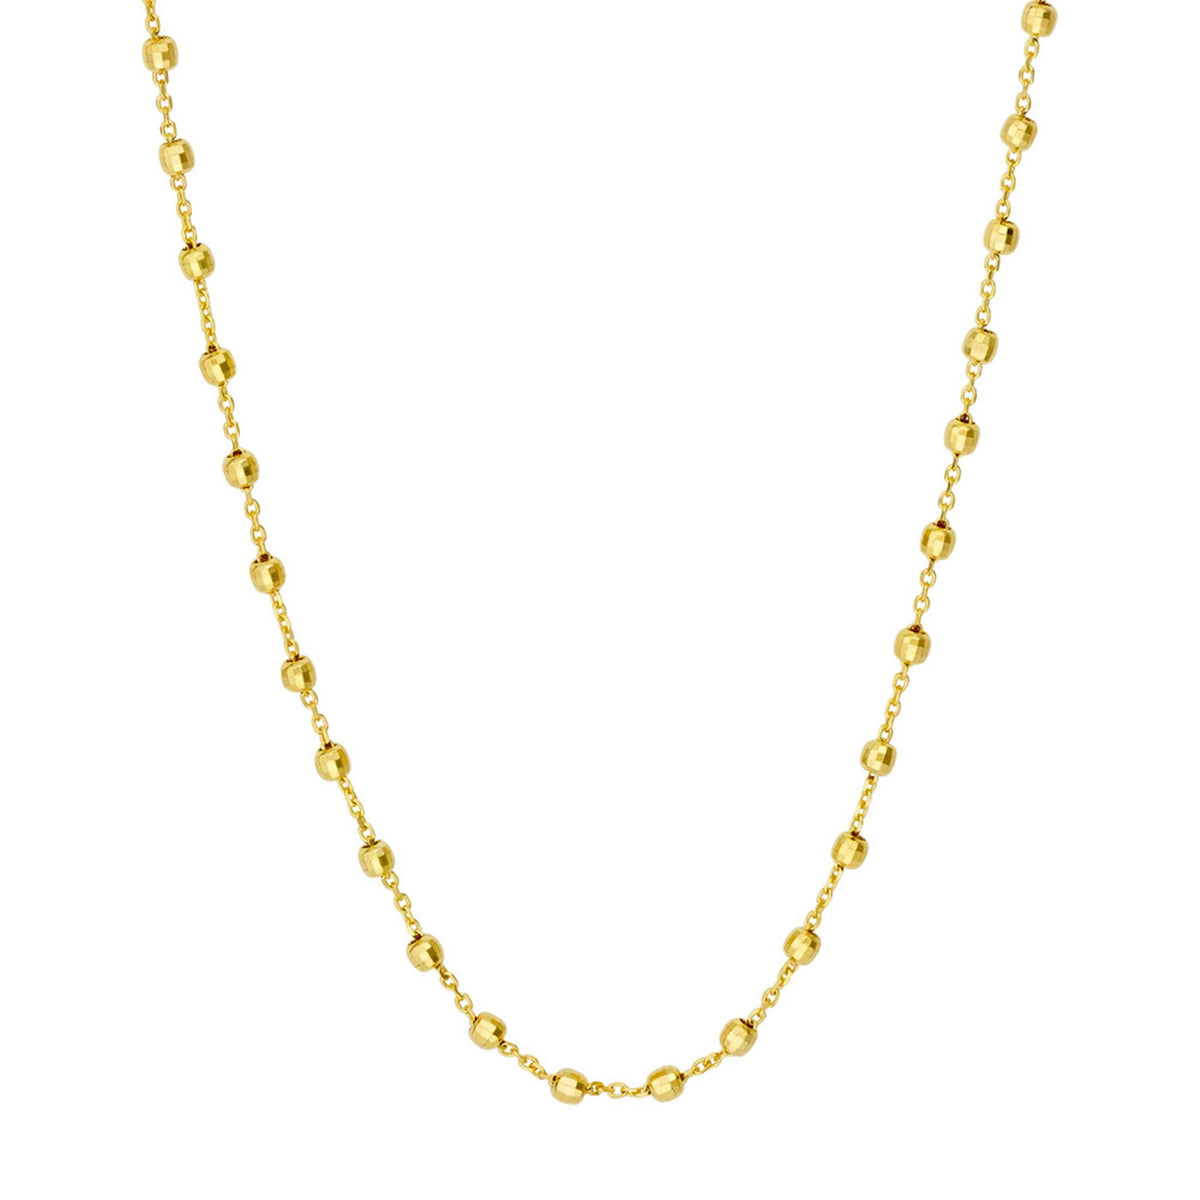 18" 14K Yellow Gold 2.5mm Beaded Station Necklace